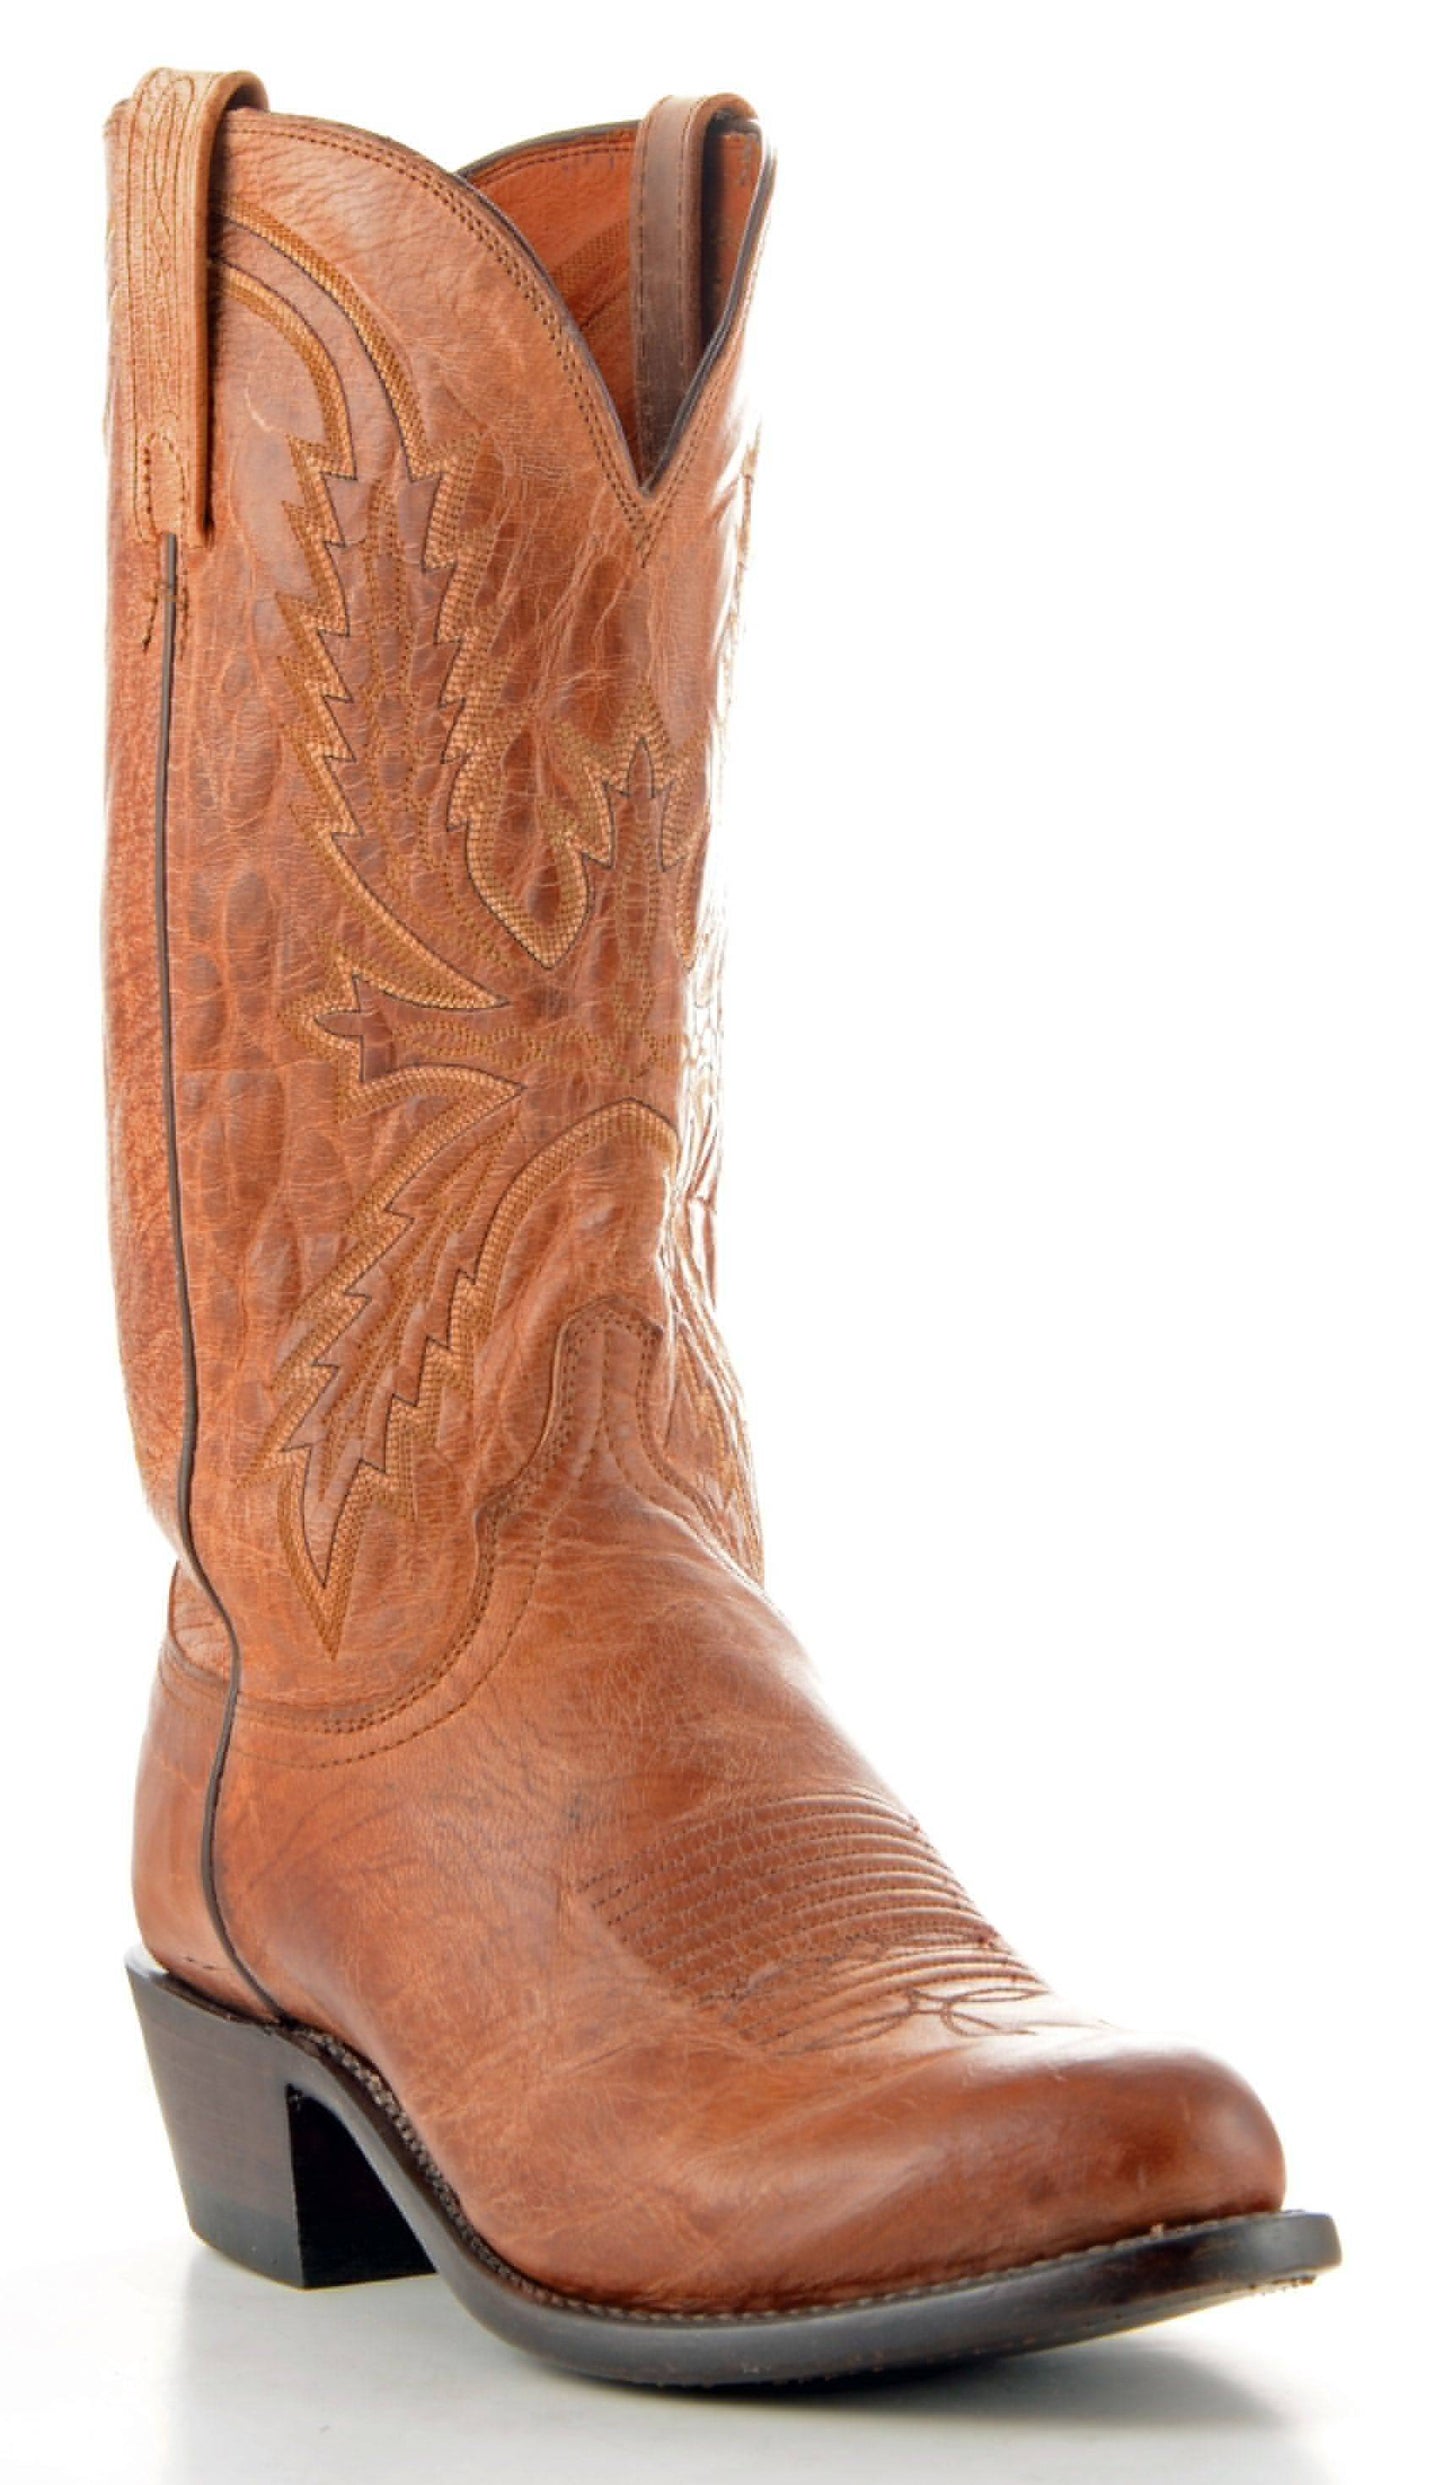 Lucchese - Mad Dog Goat - Tan